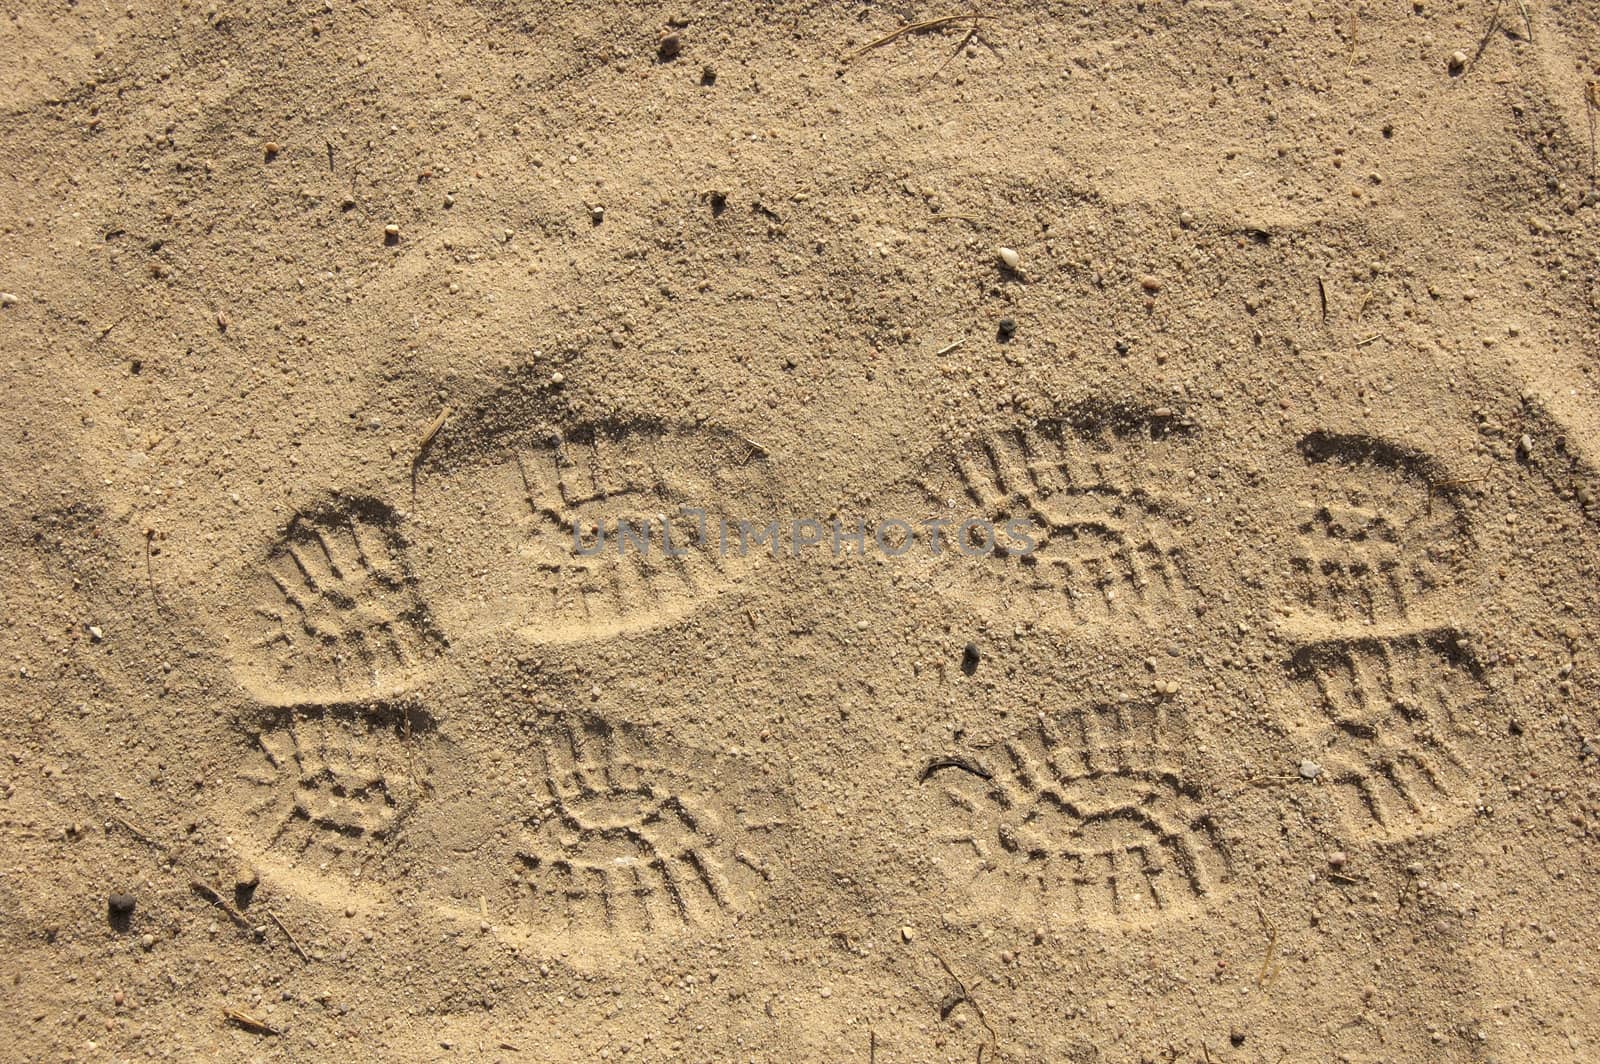 This image shows footsteps on sand